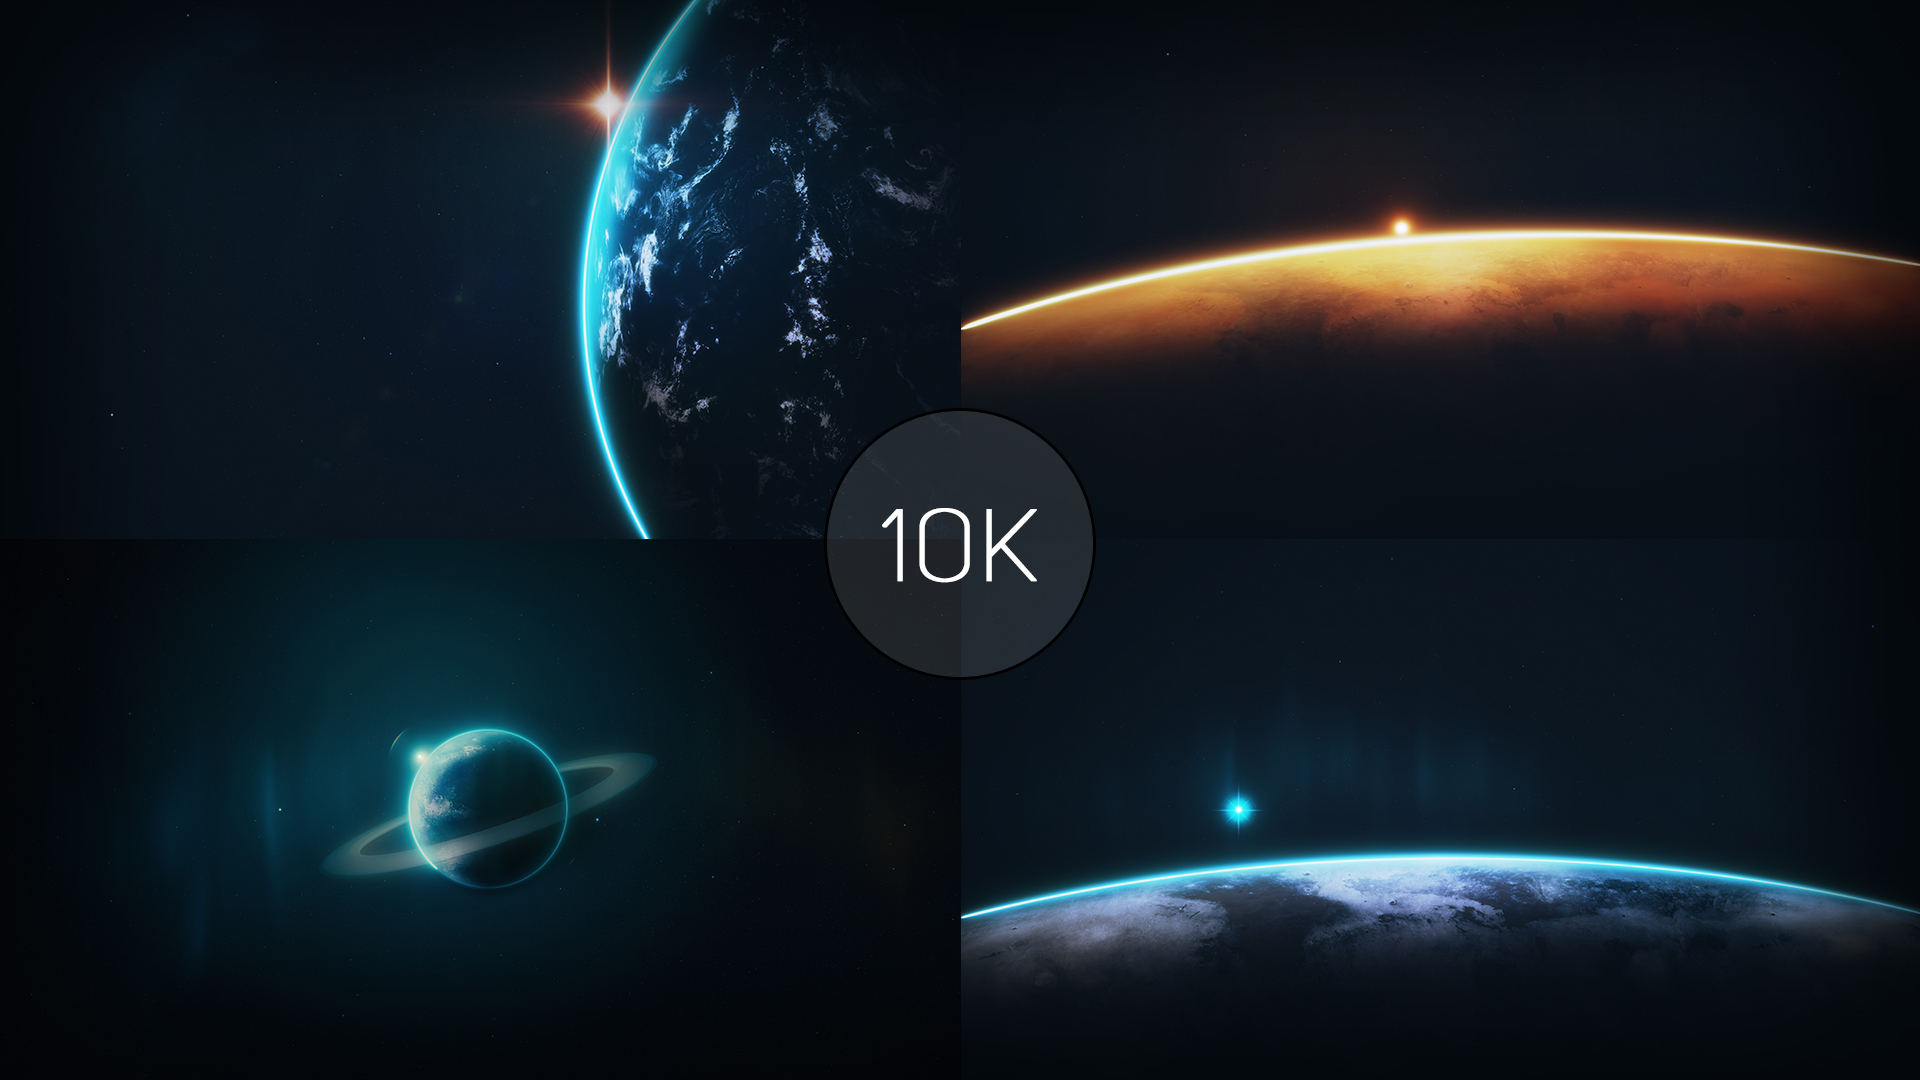 Digital Wallpaper Pack Space 10k Resolution Release Images, Photos, Reviews